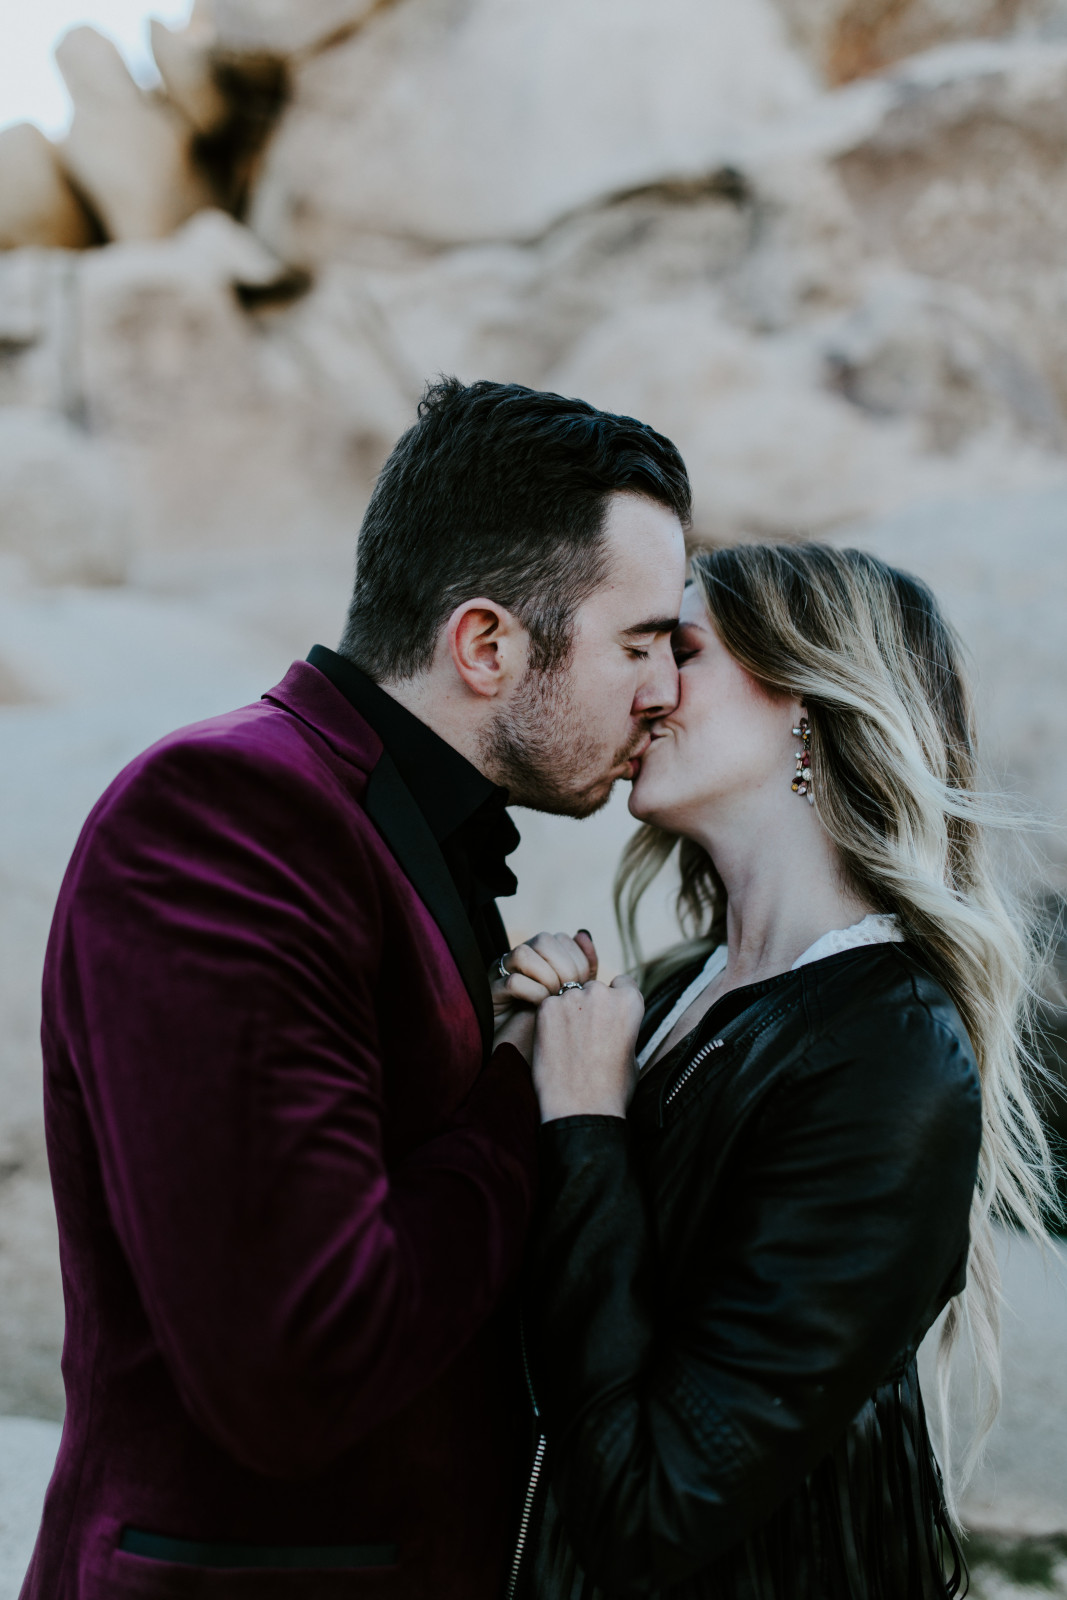 Alyssa and Jeremy go in for a kiss at Joshua Tree National Park, CA Elopement wedding photography at Joshua Tree National Park by Sienna Plus Josh.